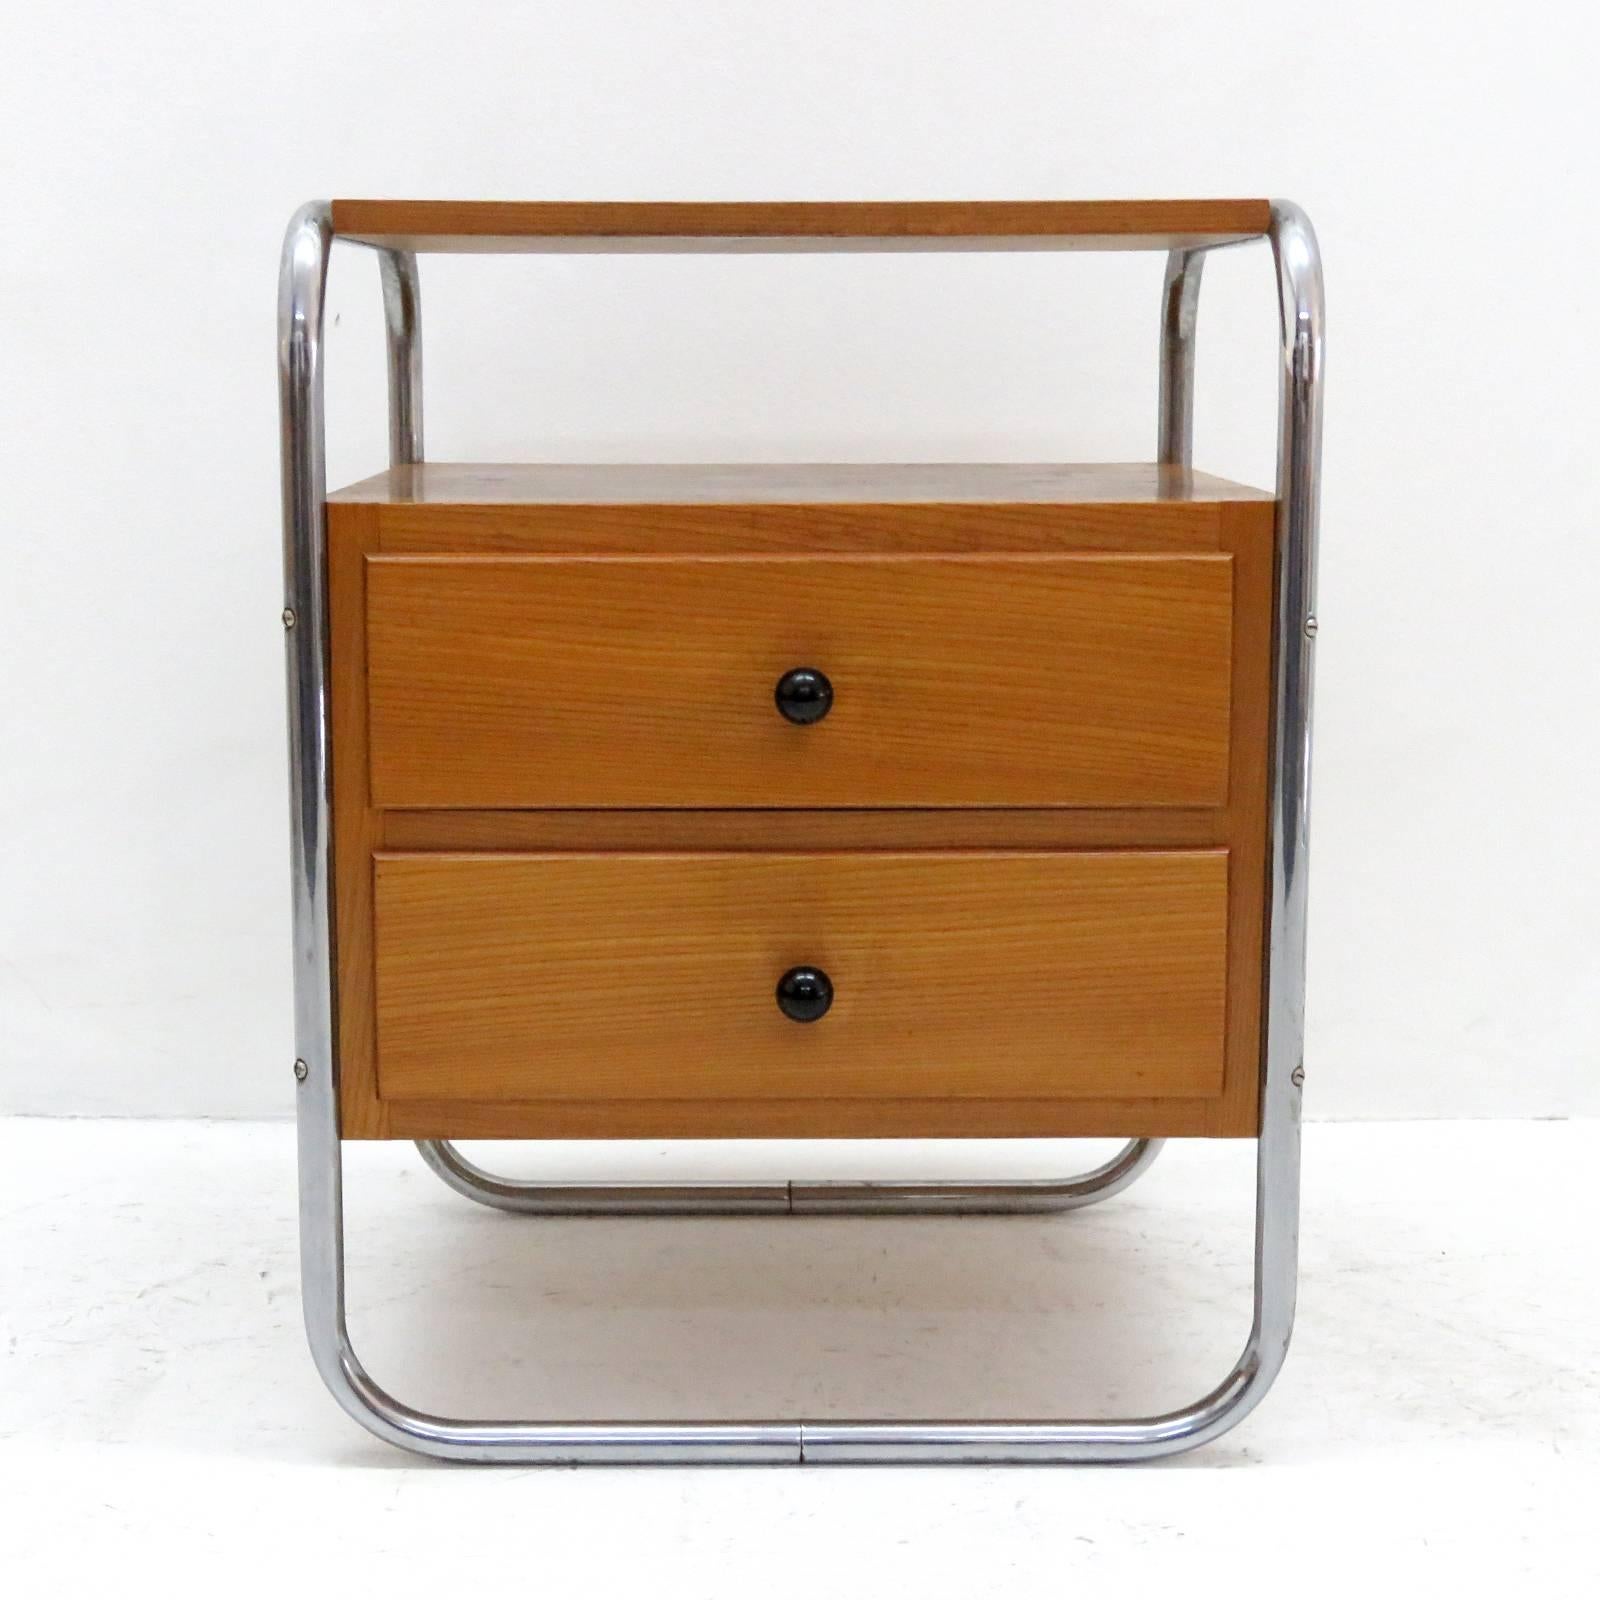 Wonderful pair of Bauhaus era bedside tables in veneered elm, each with two drawers and two shelves, tubular frames of chrome-plated metal.